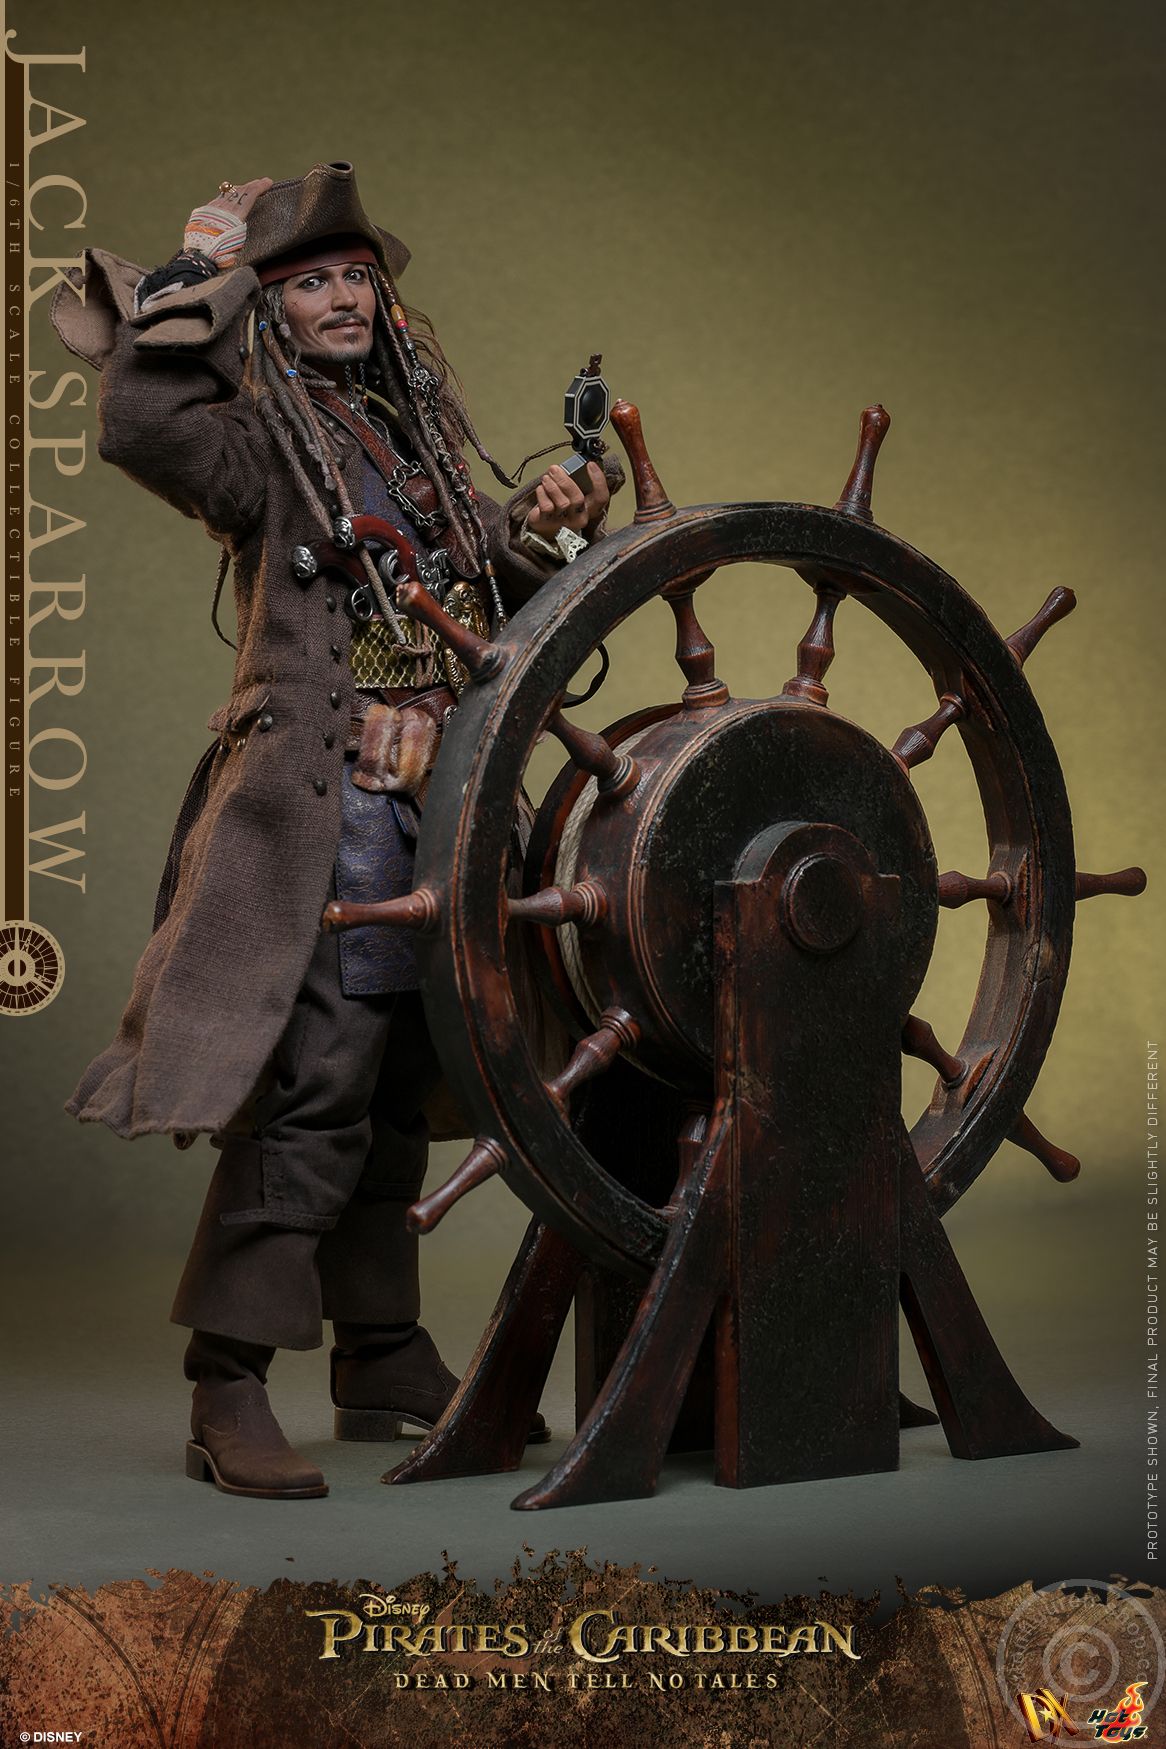 Jack Sparrow - Pirates of the Caribbean - Standard Version